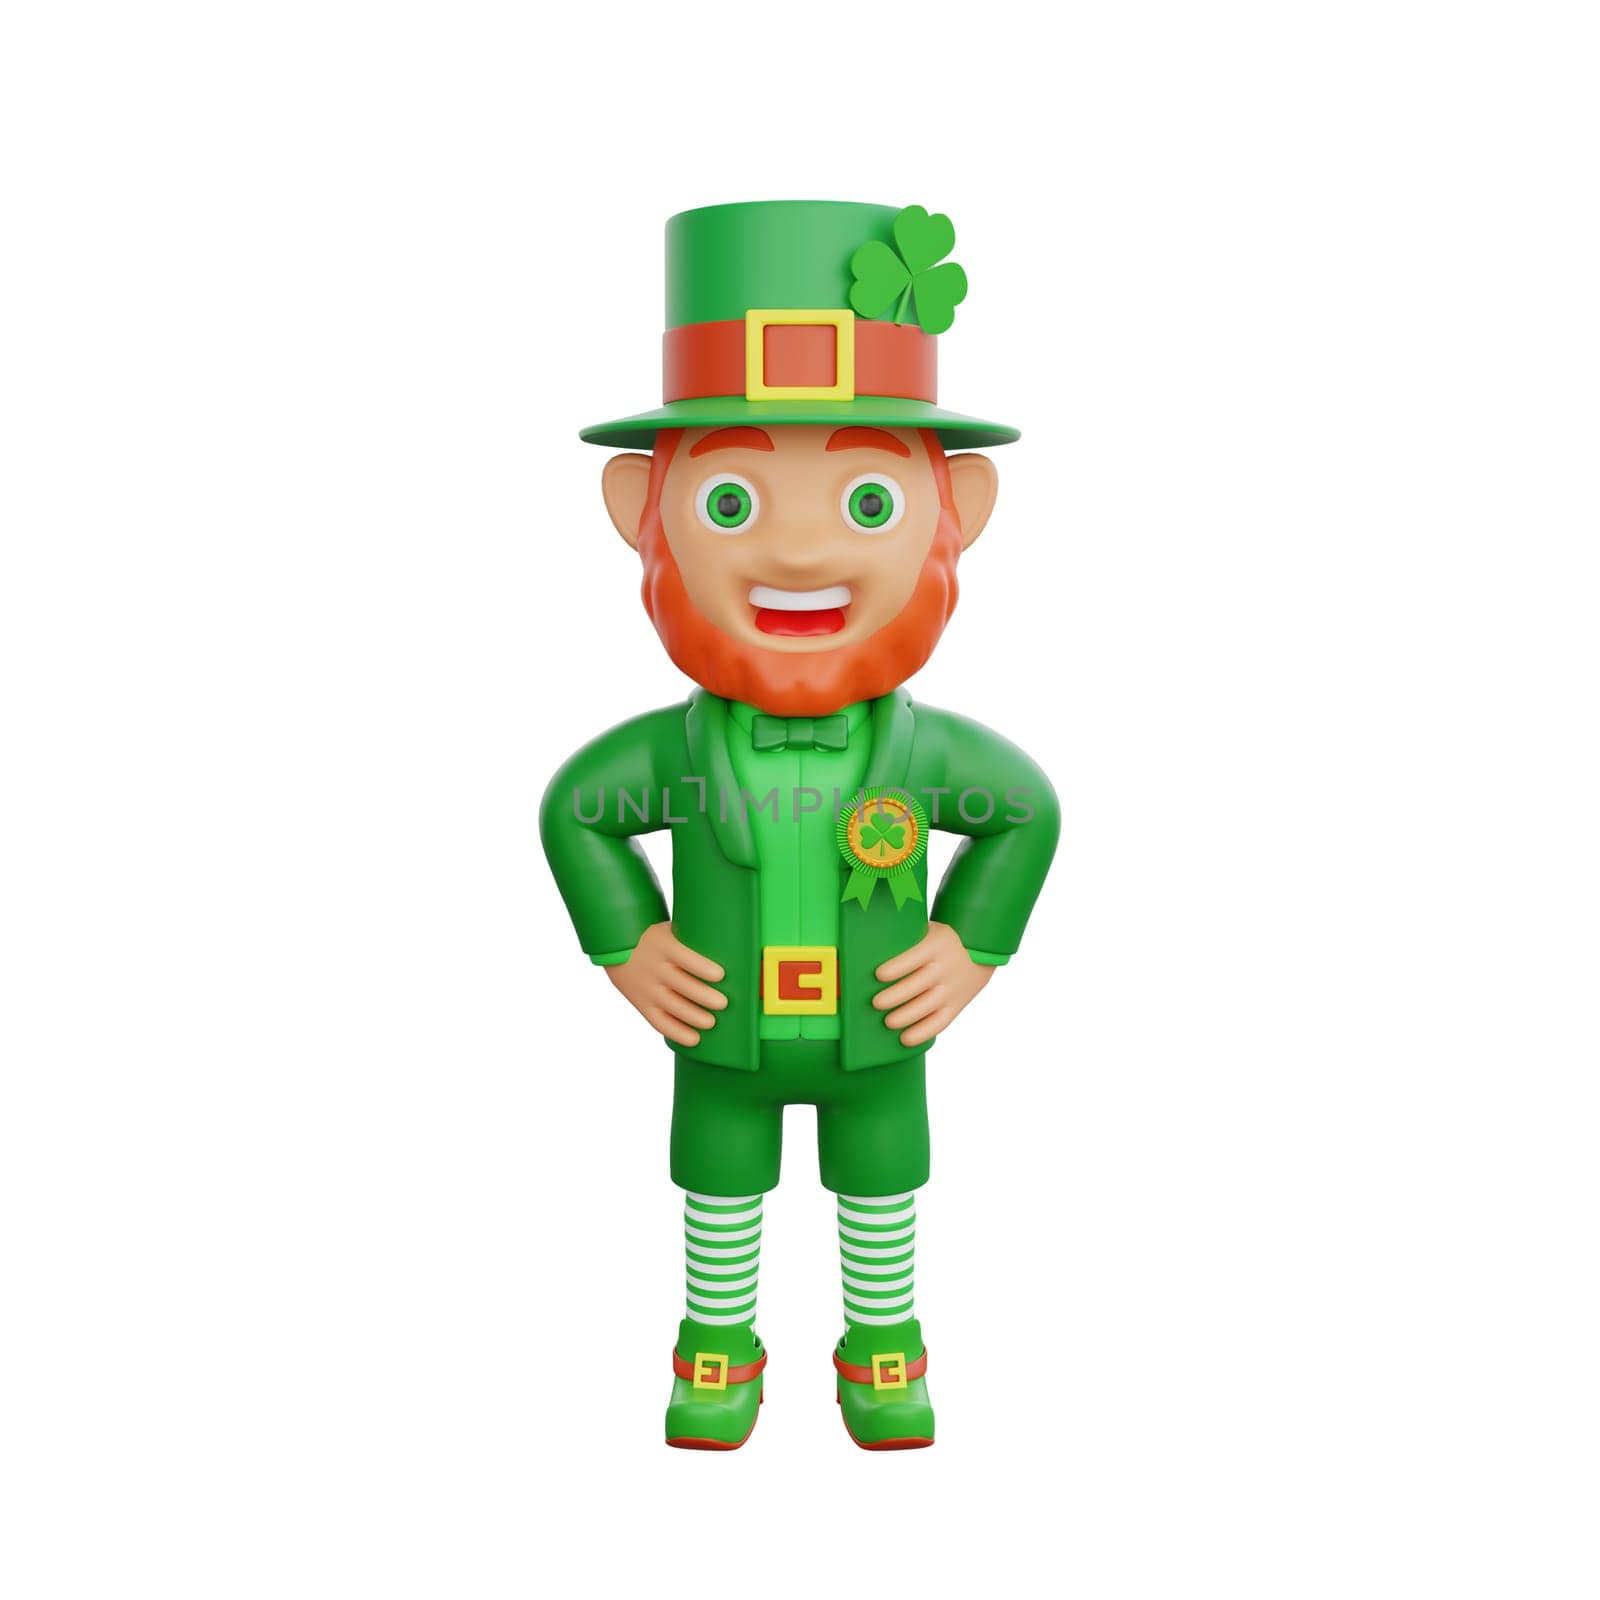 3D illustration of a joyful leprechaun proudly displaying a badge, perfect for St. Patrick's Day themed projects